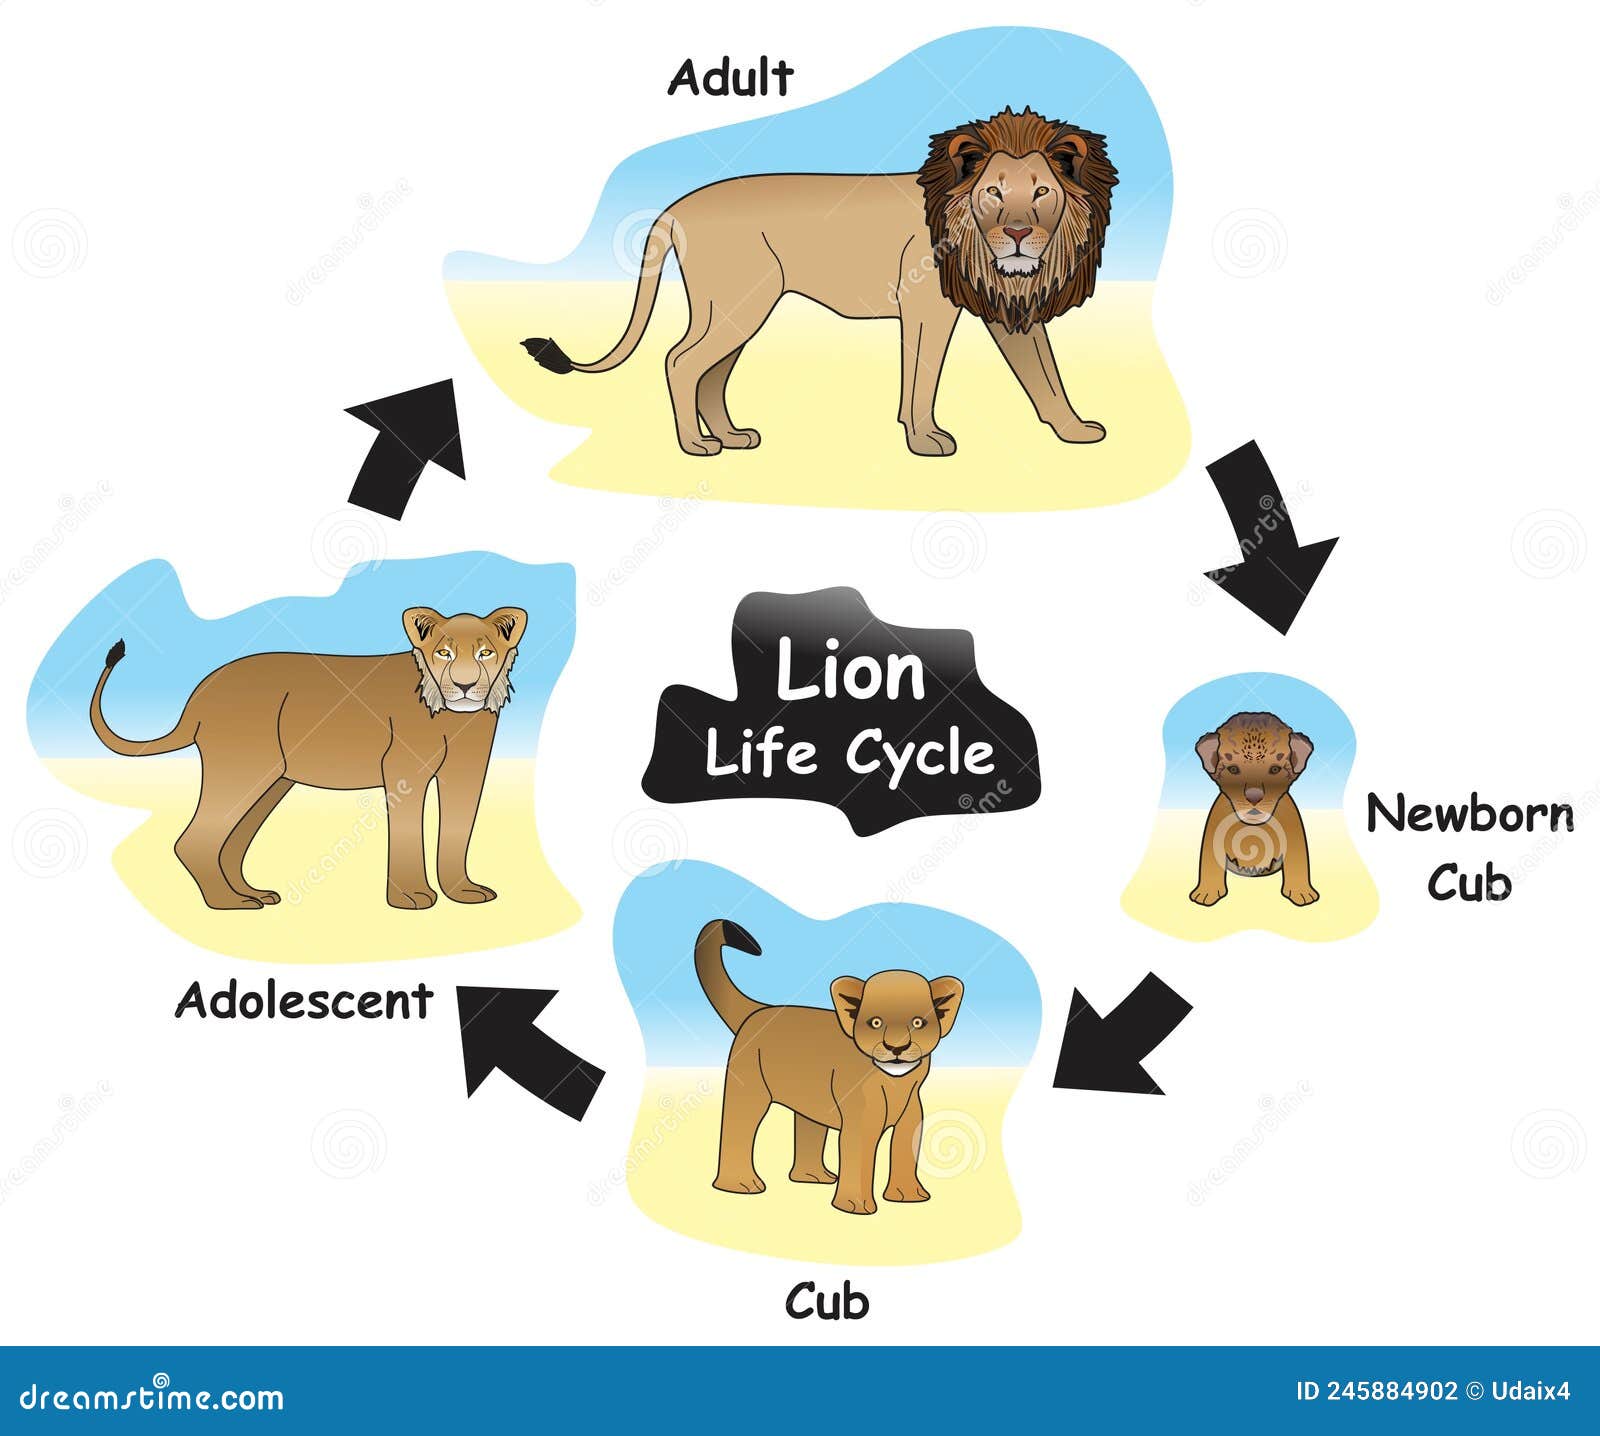 lion life cycle infographic diagram